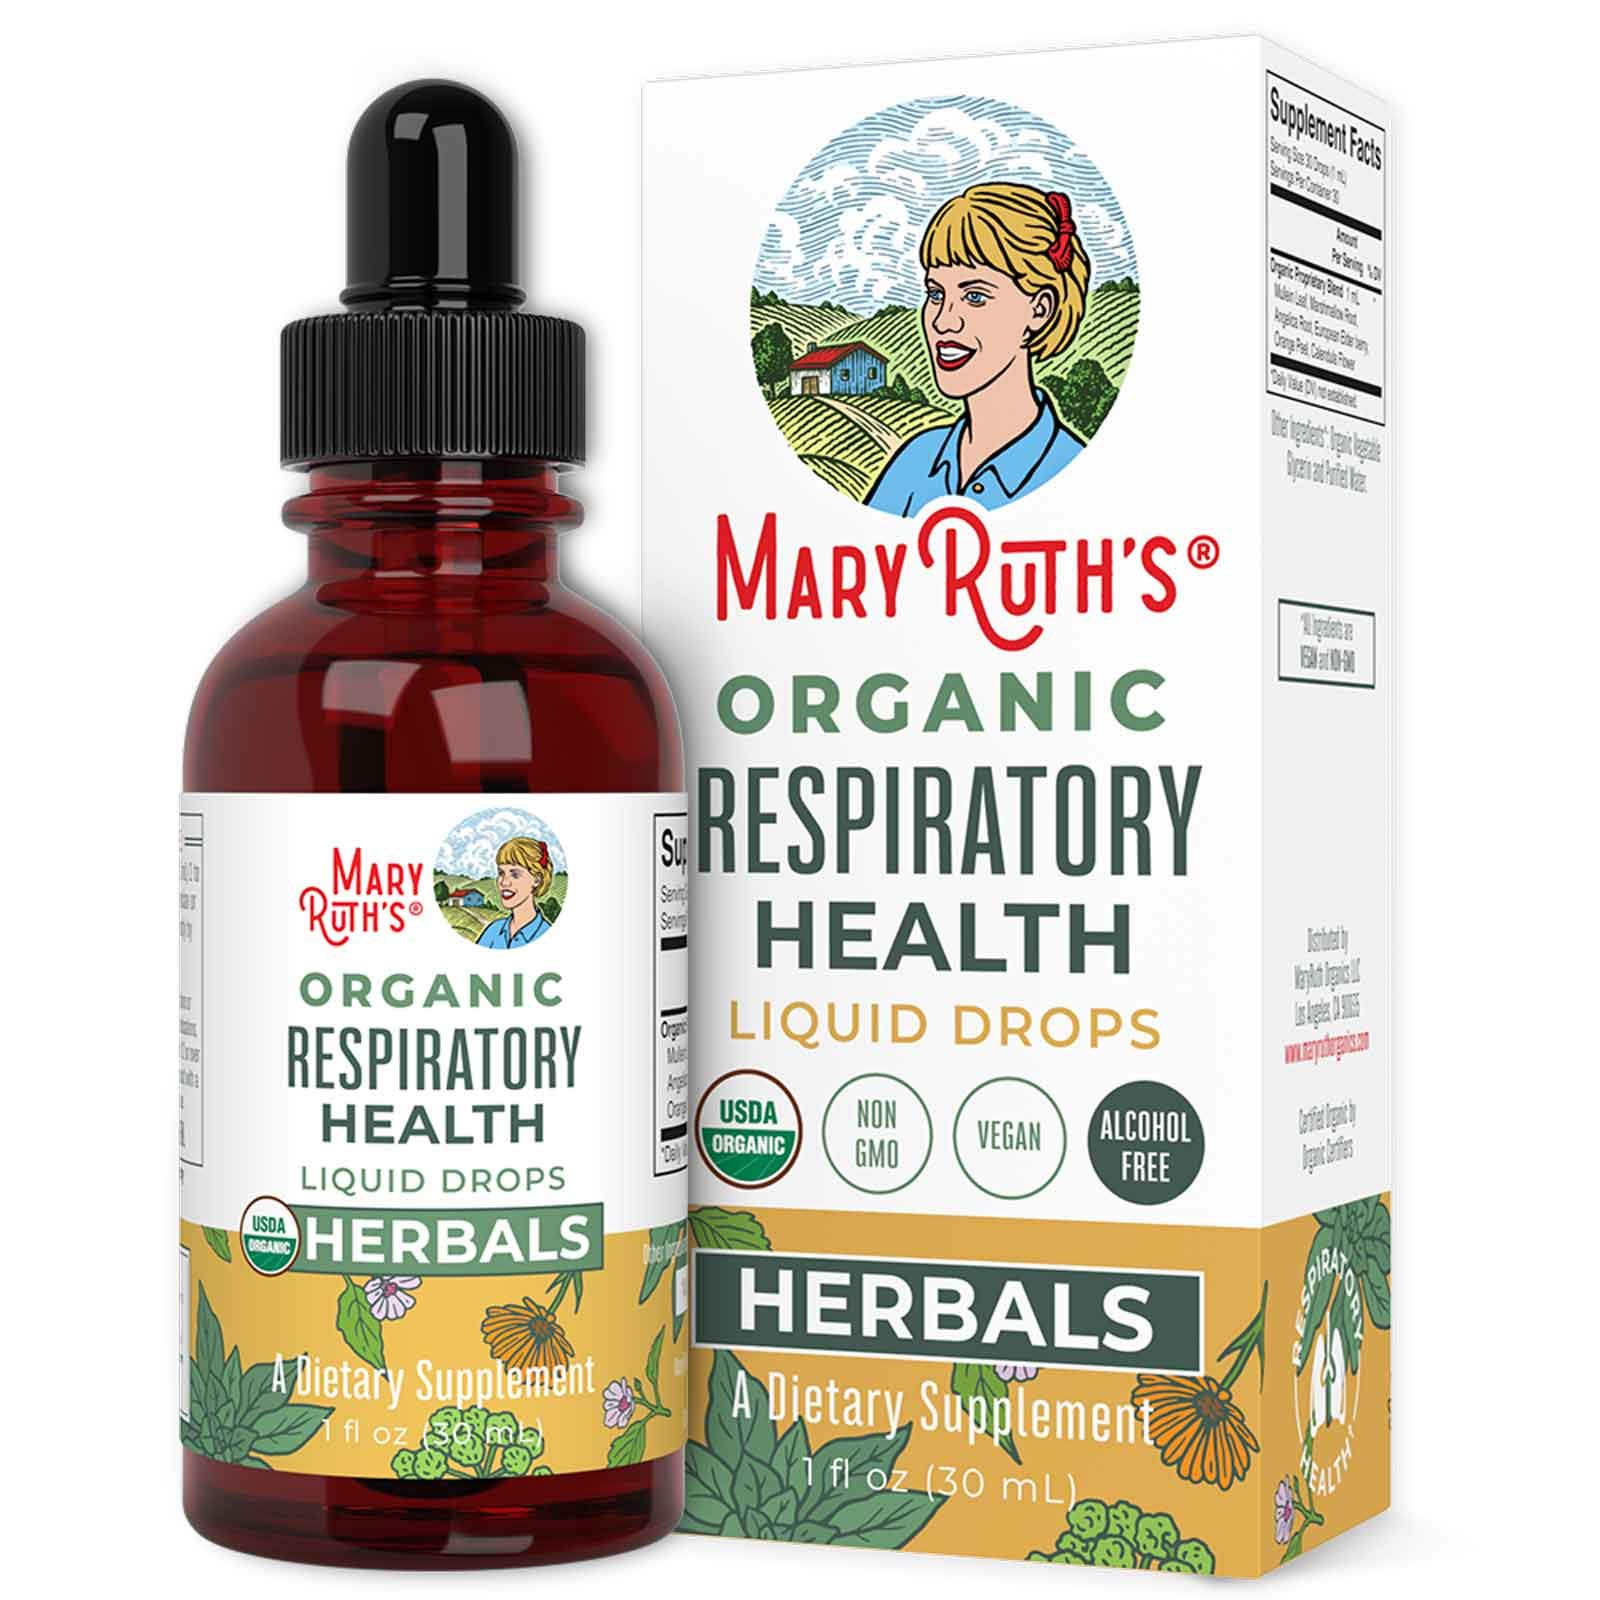 MaryRuth Organics USDA Organic Respiratory Health Liquid Drops with Mullein Leaf, Marshmallow Root  Elderberry  Sinus Relief and Lung cleanse Toni